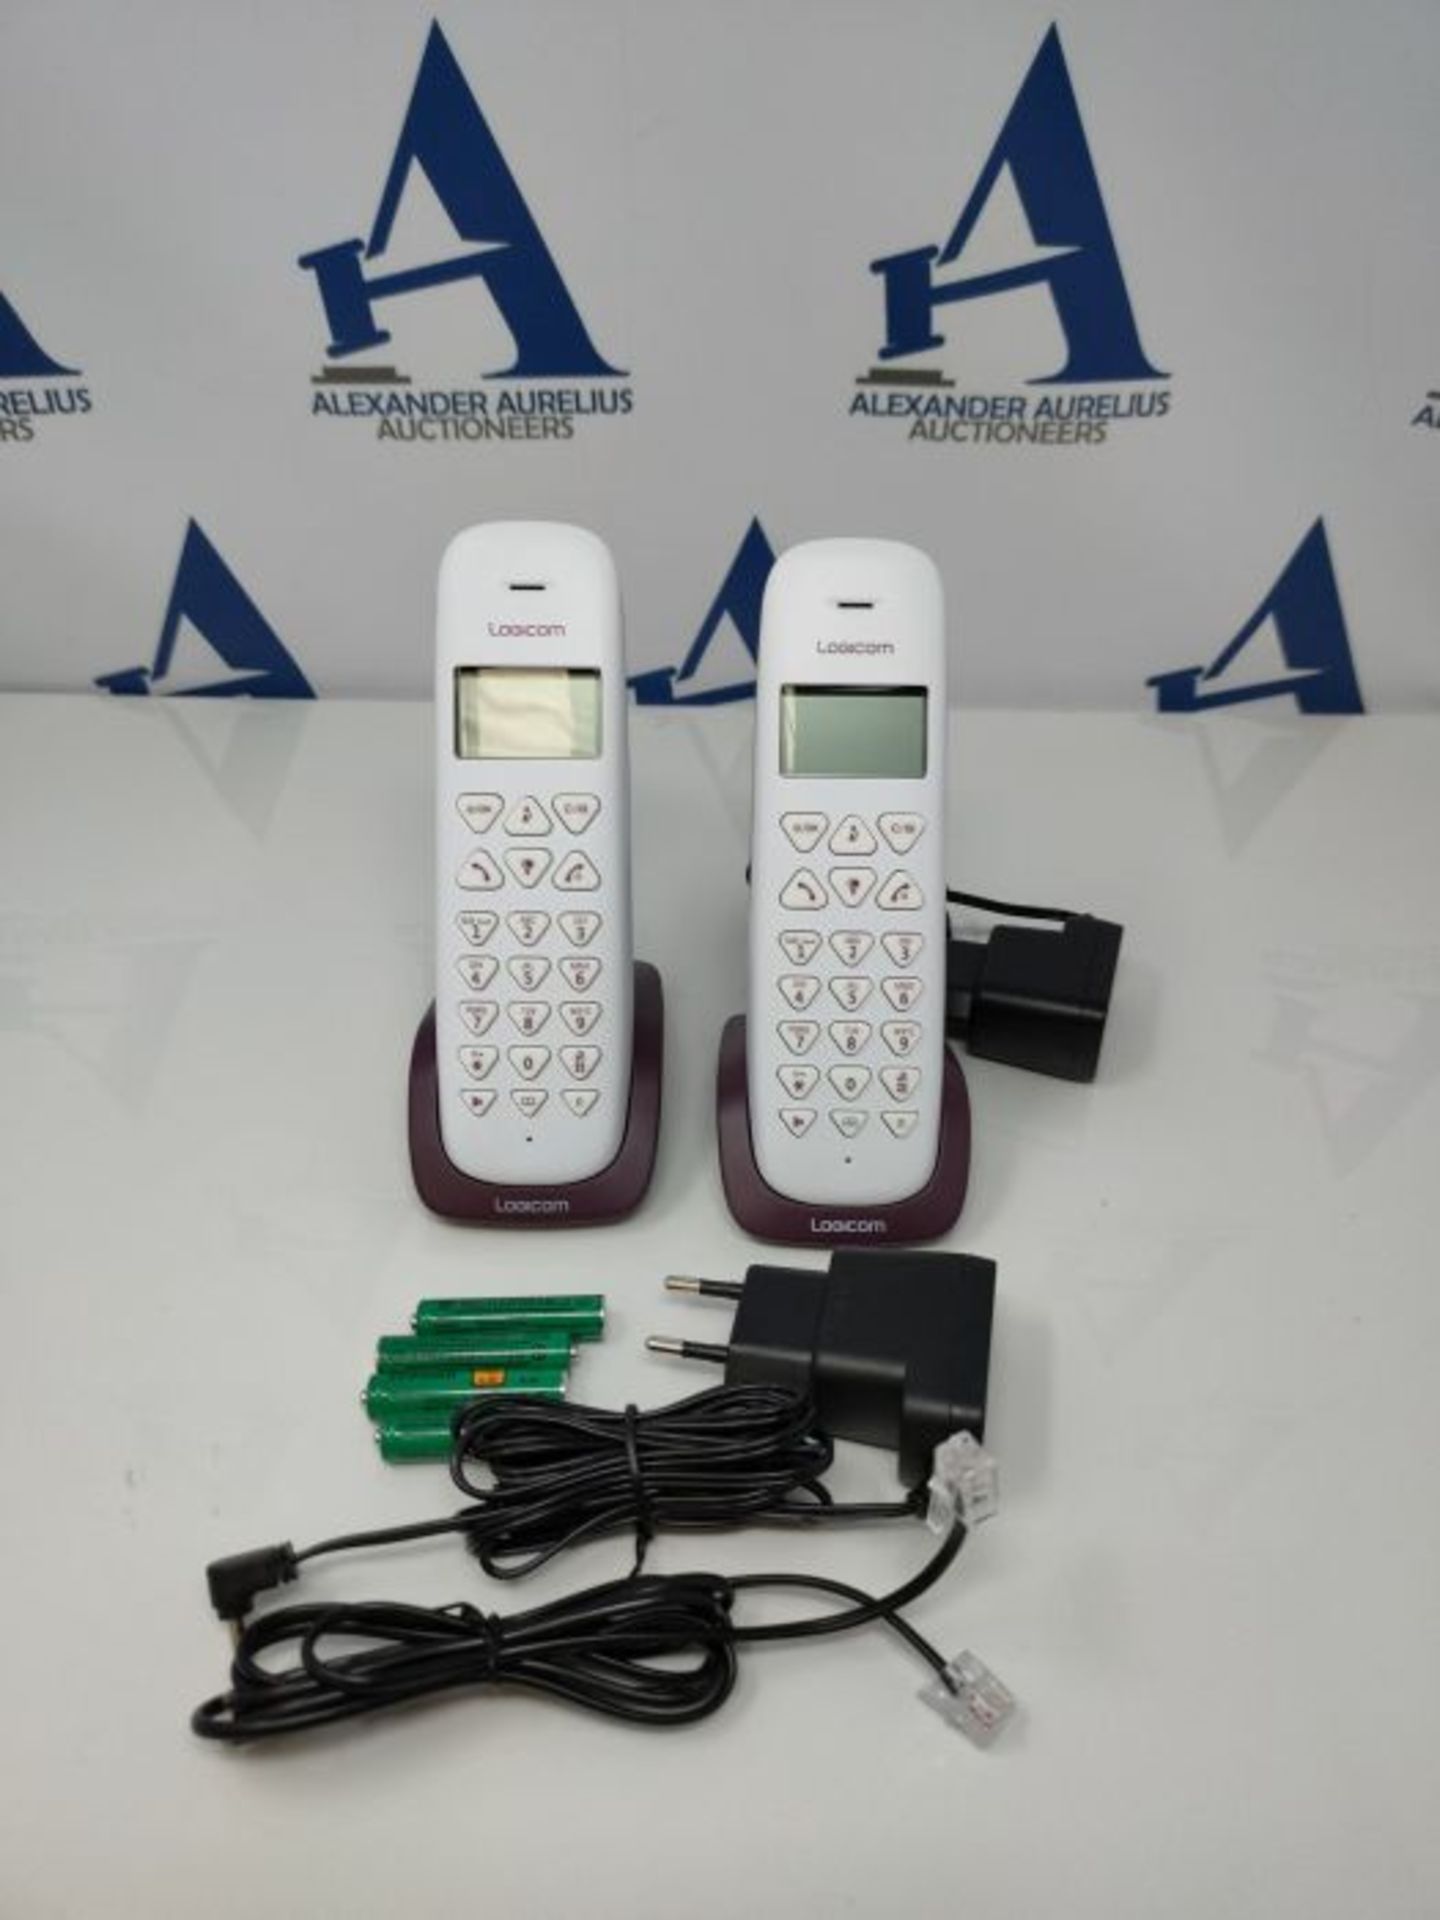 Fixed Wireless Telephone - San Voicemail - Duo - Analogue Phones and DECT - Logicom Ve - Image 3 of 3